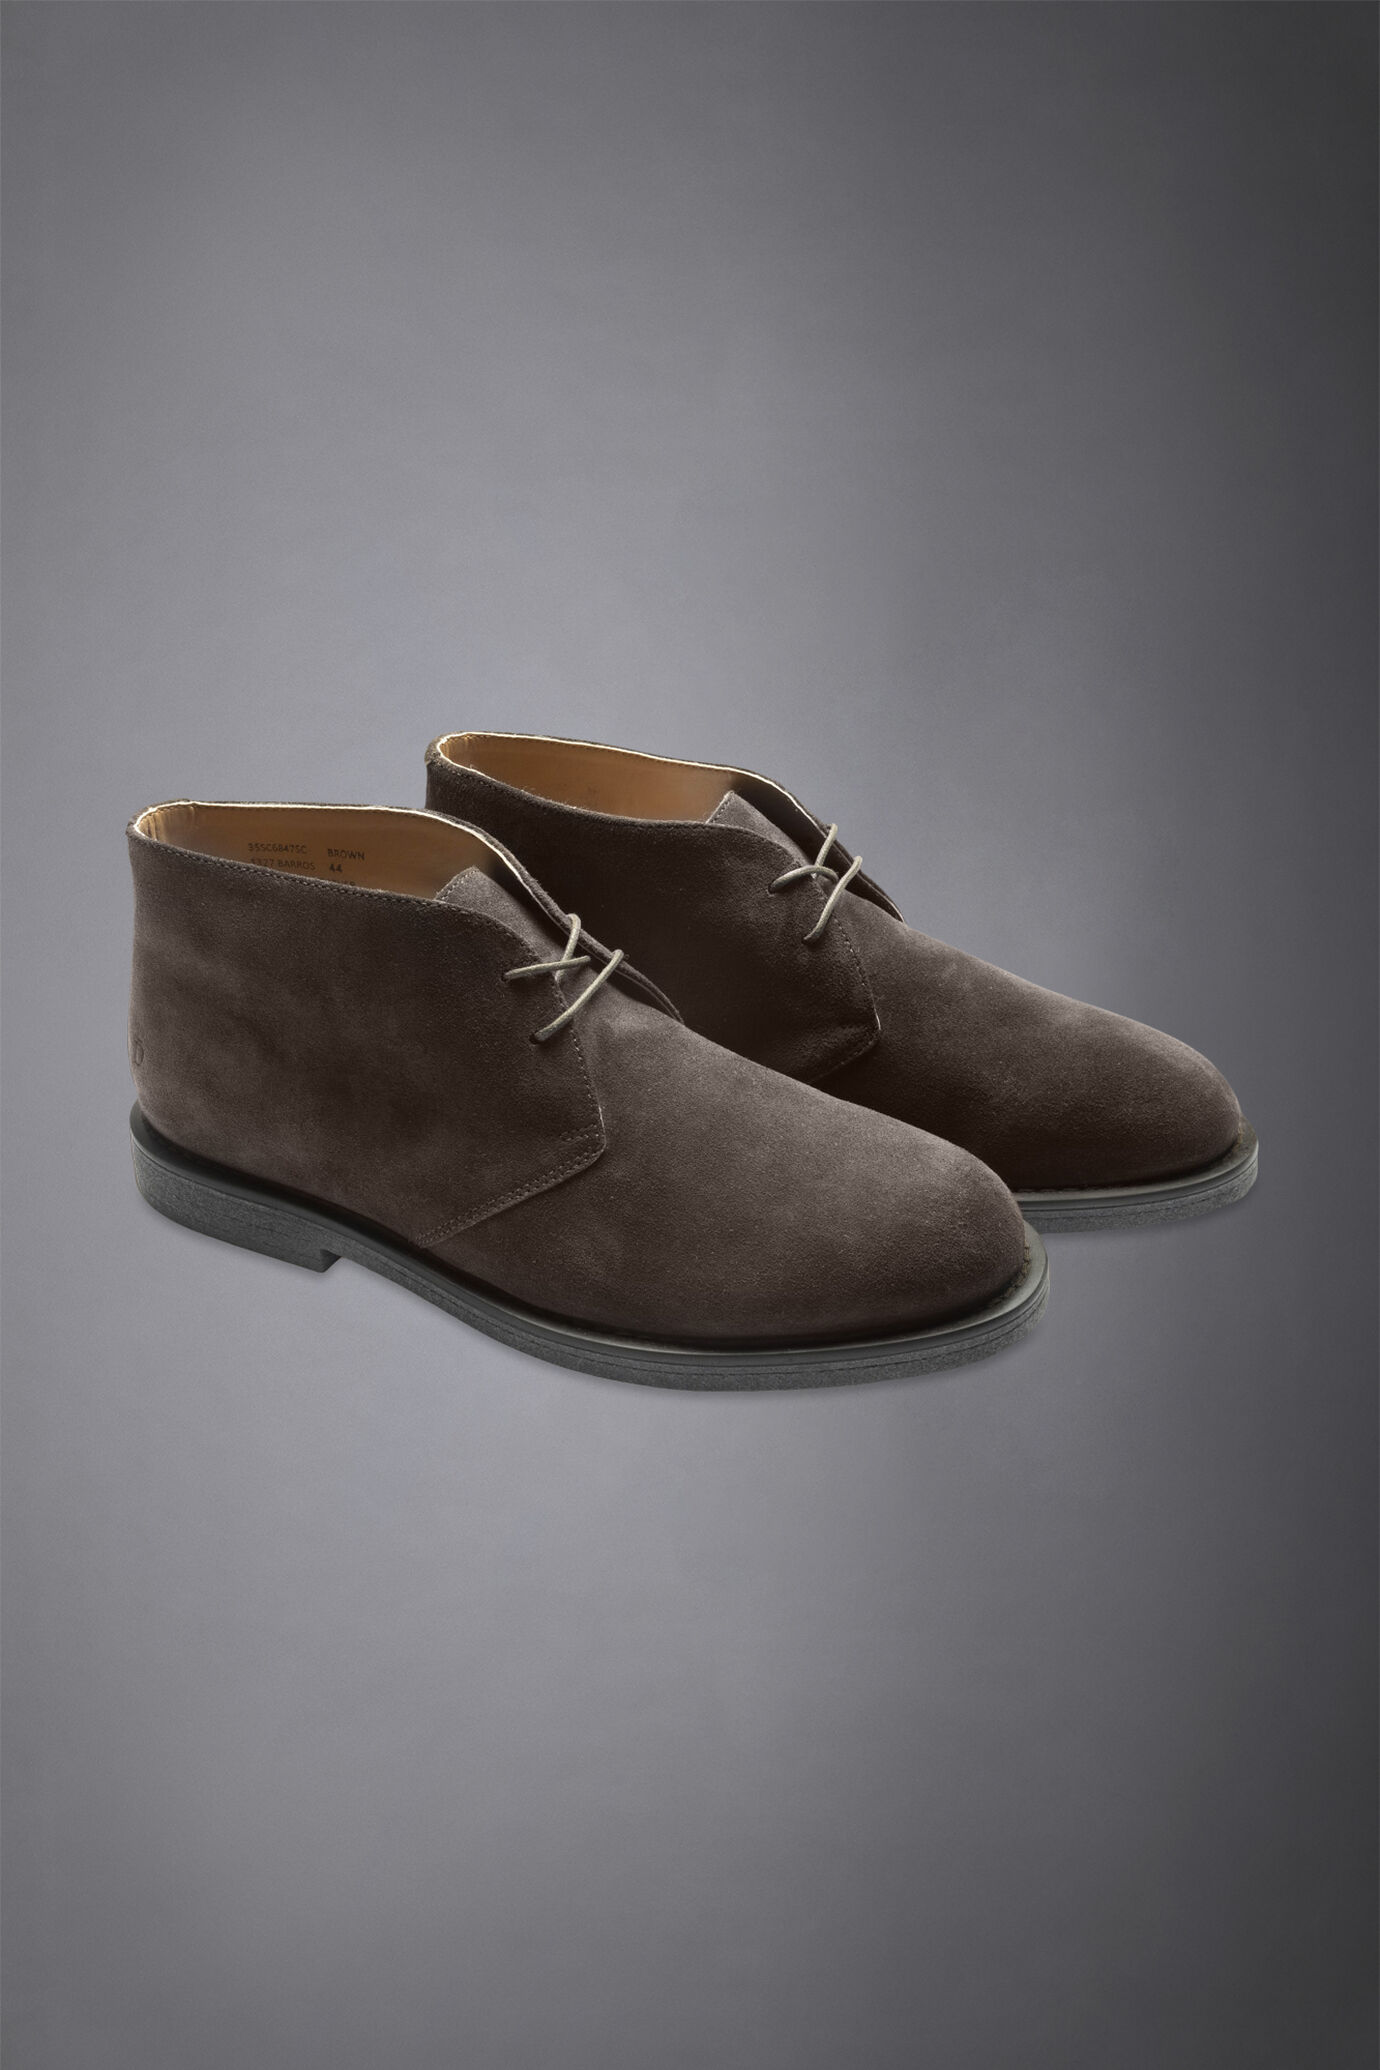 Desert boots 100% suede with rubber sole